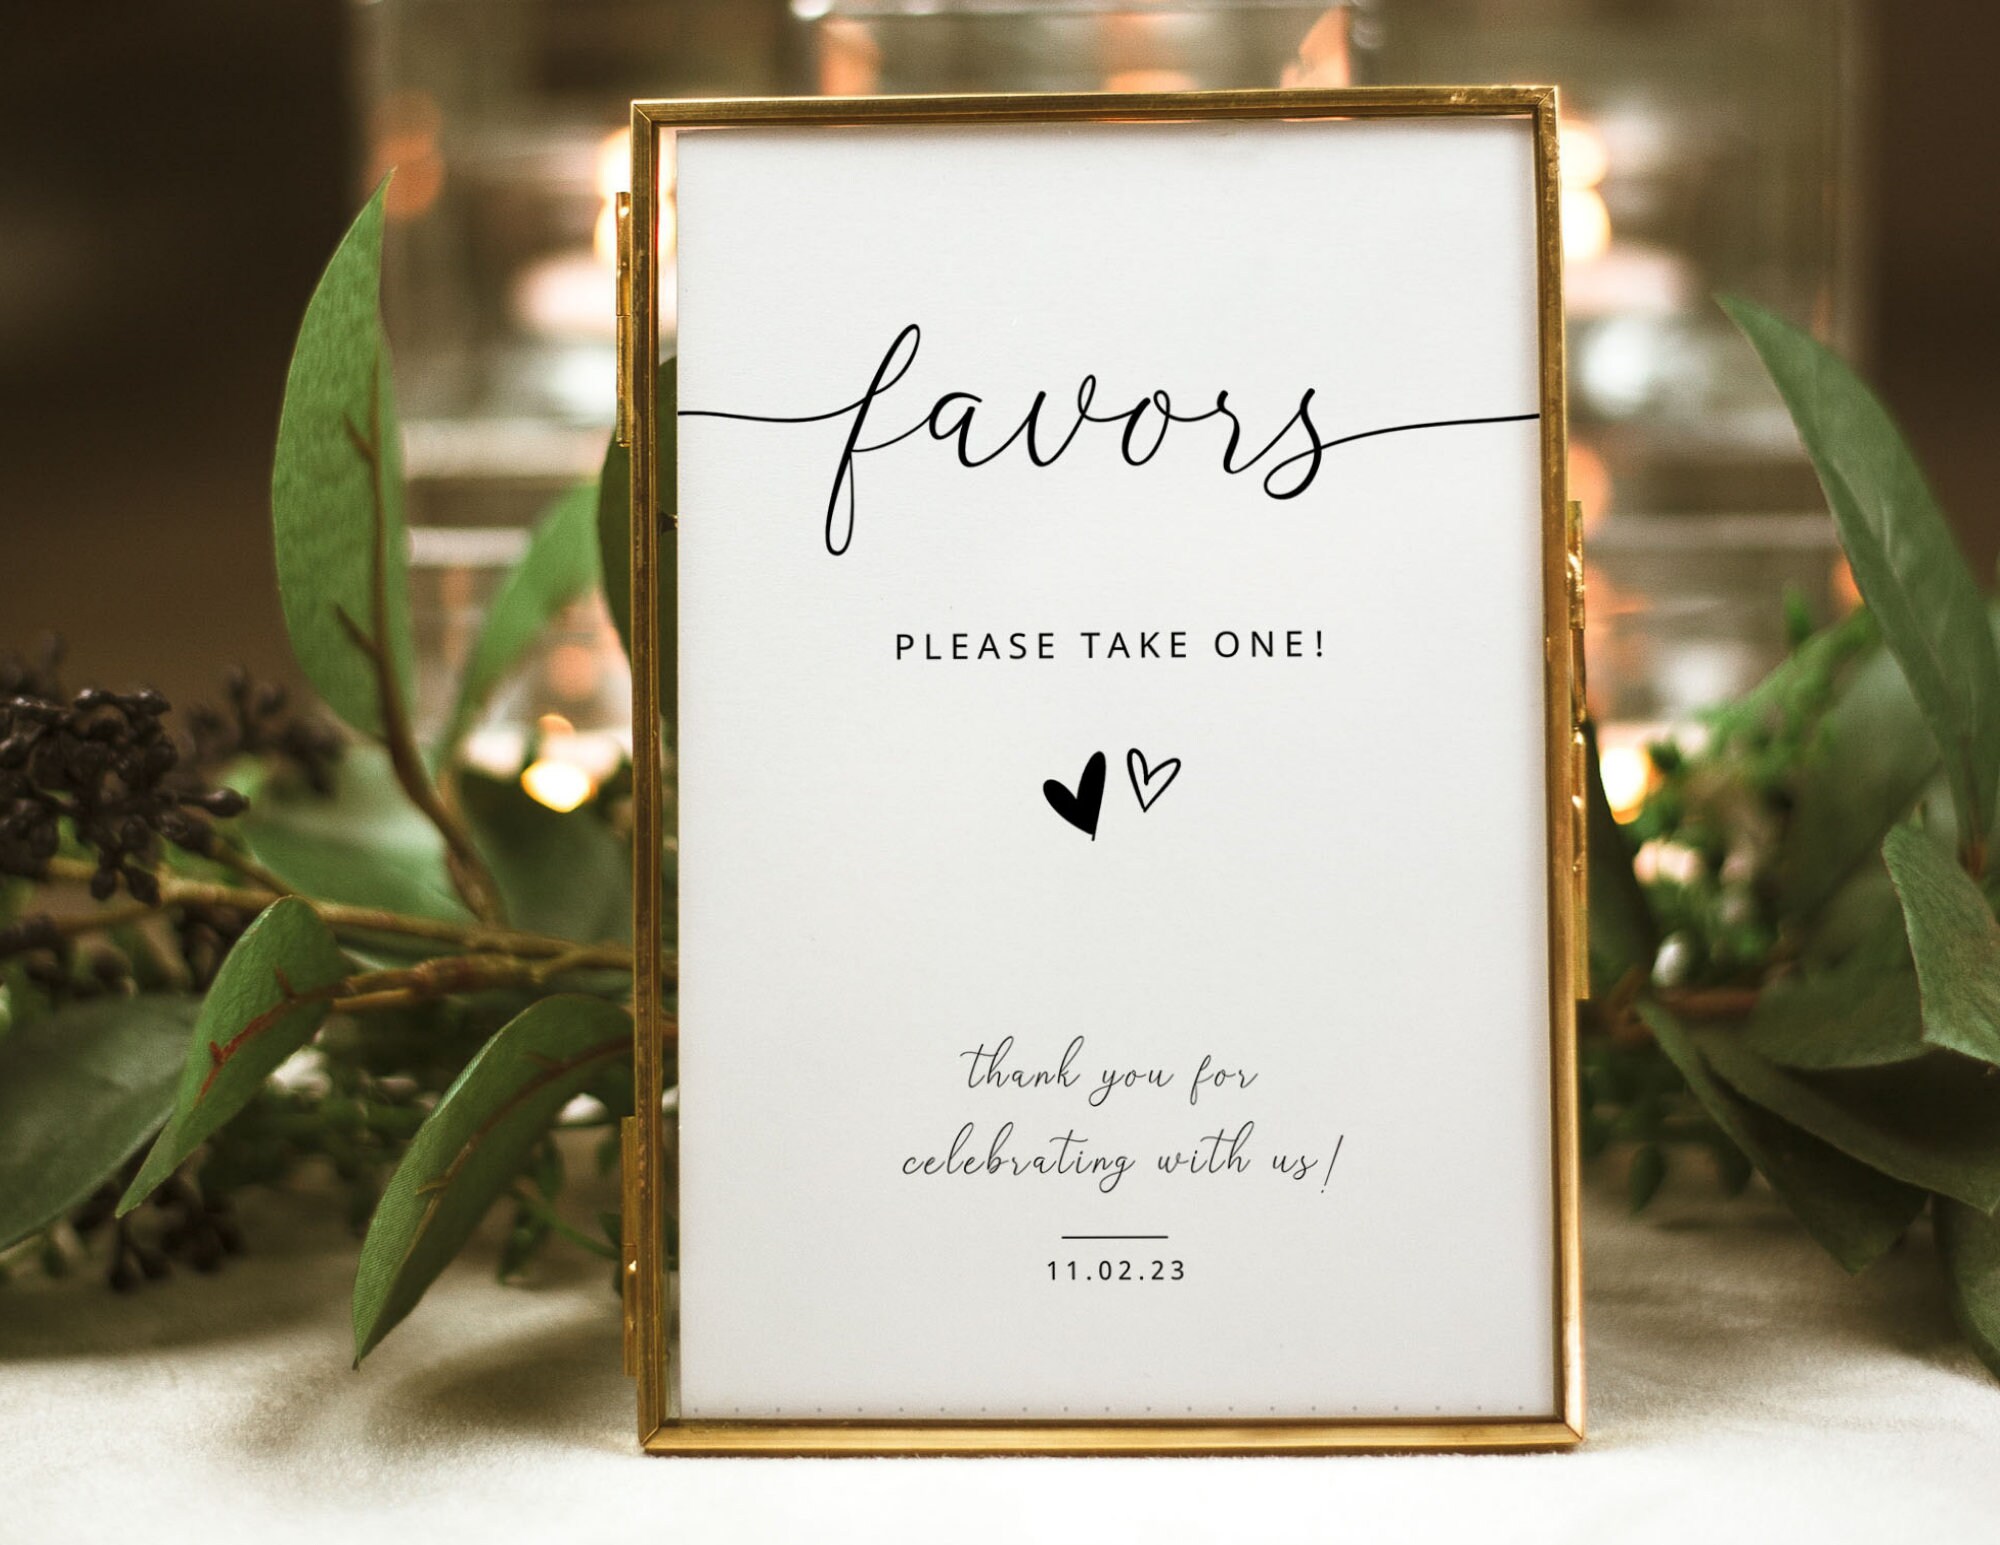 For Our Number One Fans Please Take One . Wedding Fans Favors Printable  Sign . Greenery and Gold . Wedding Party . Instant Download G2 